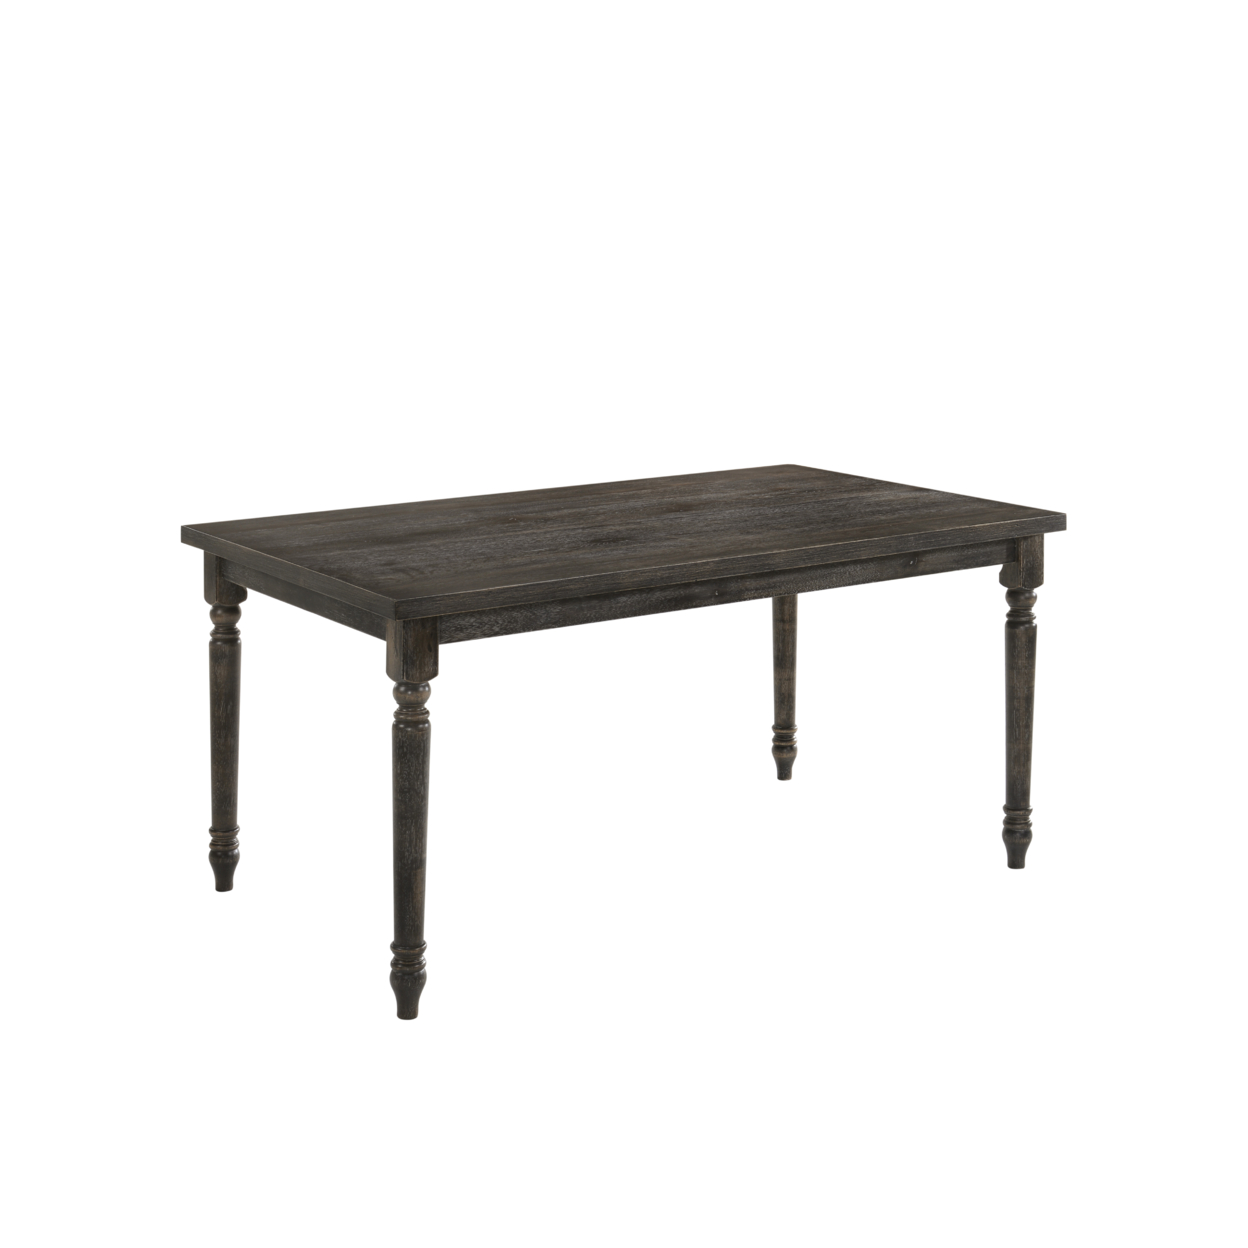 Rustic Style Wooden Dining Table With Rectangular Top And Turned Legs, Gray- Saltoro Sherpi